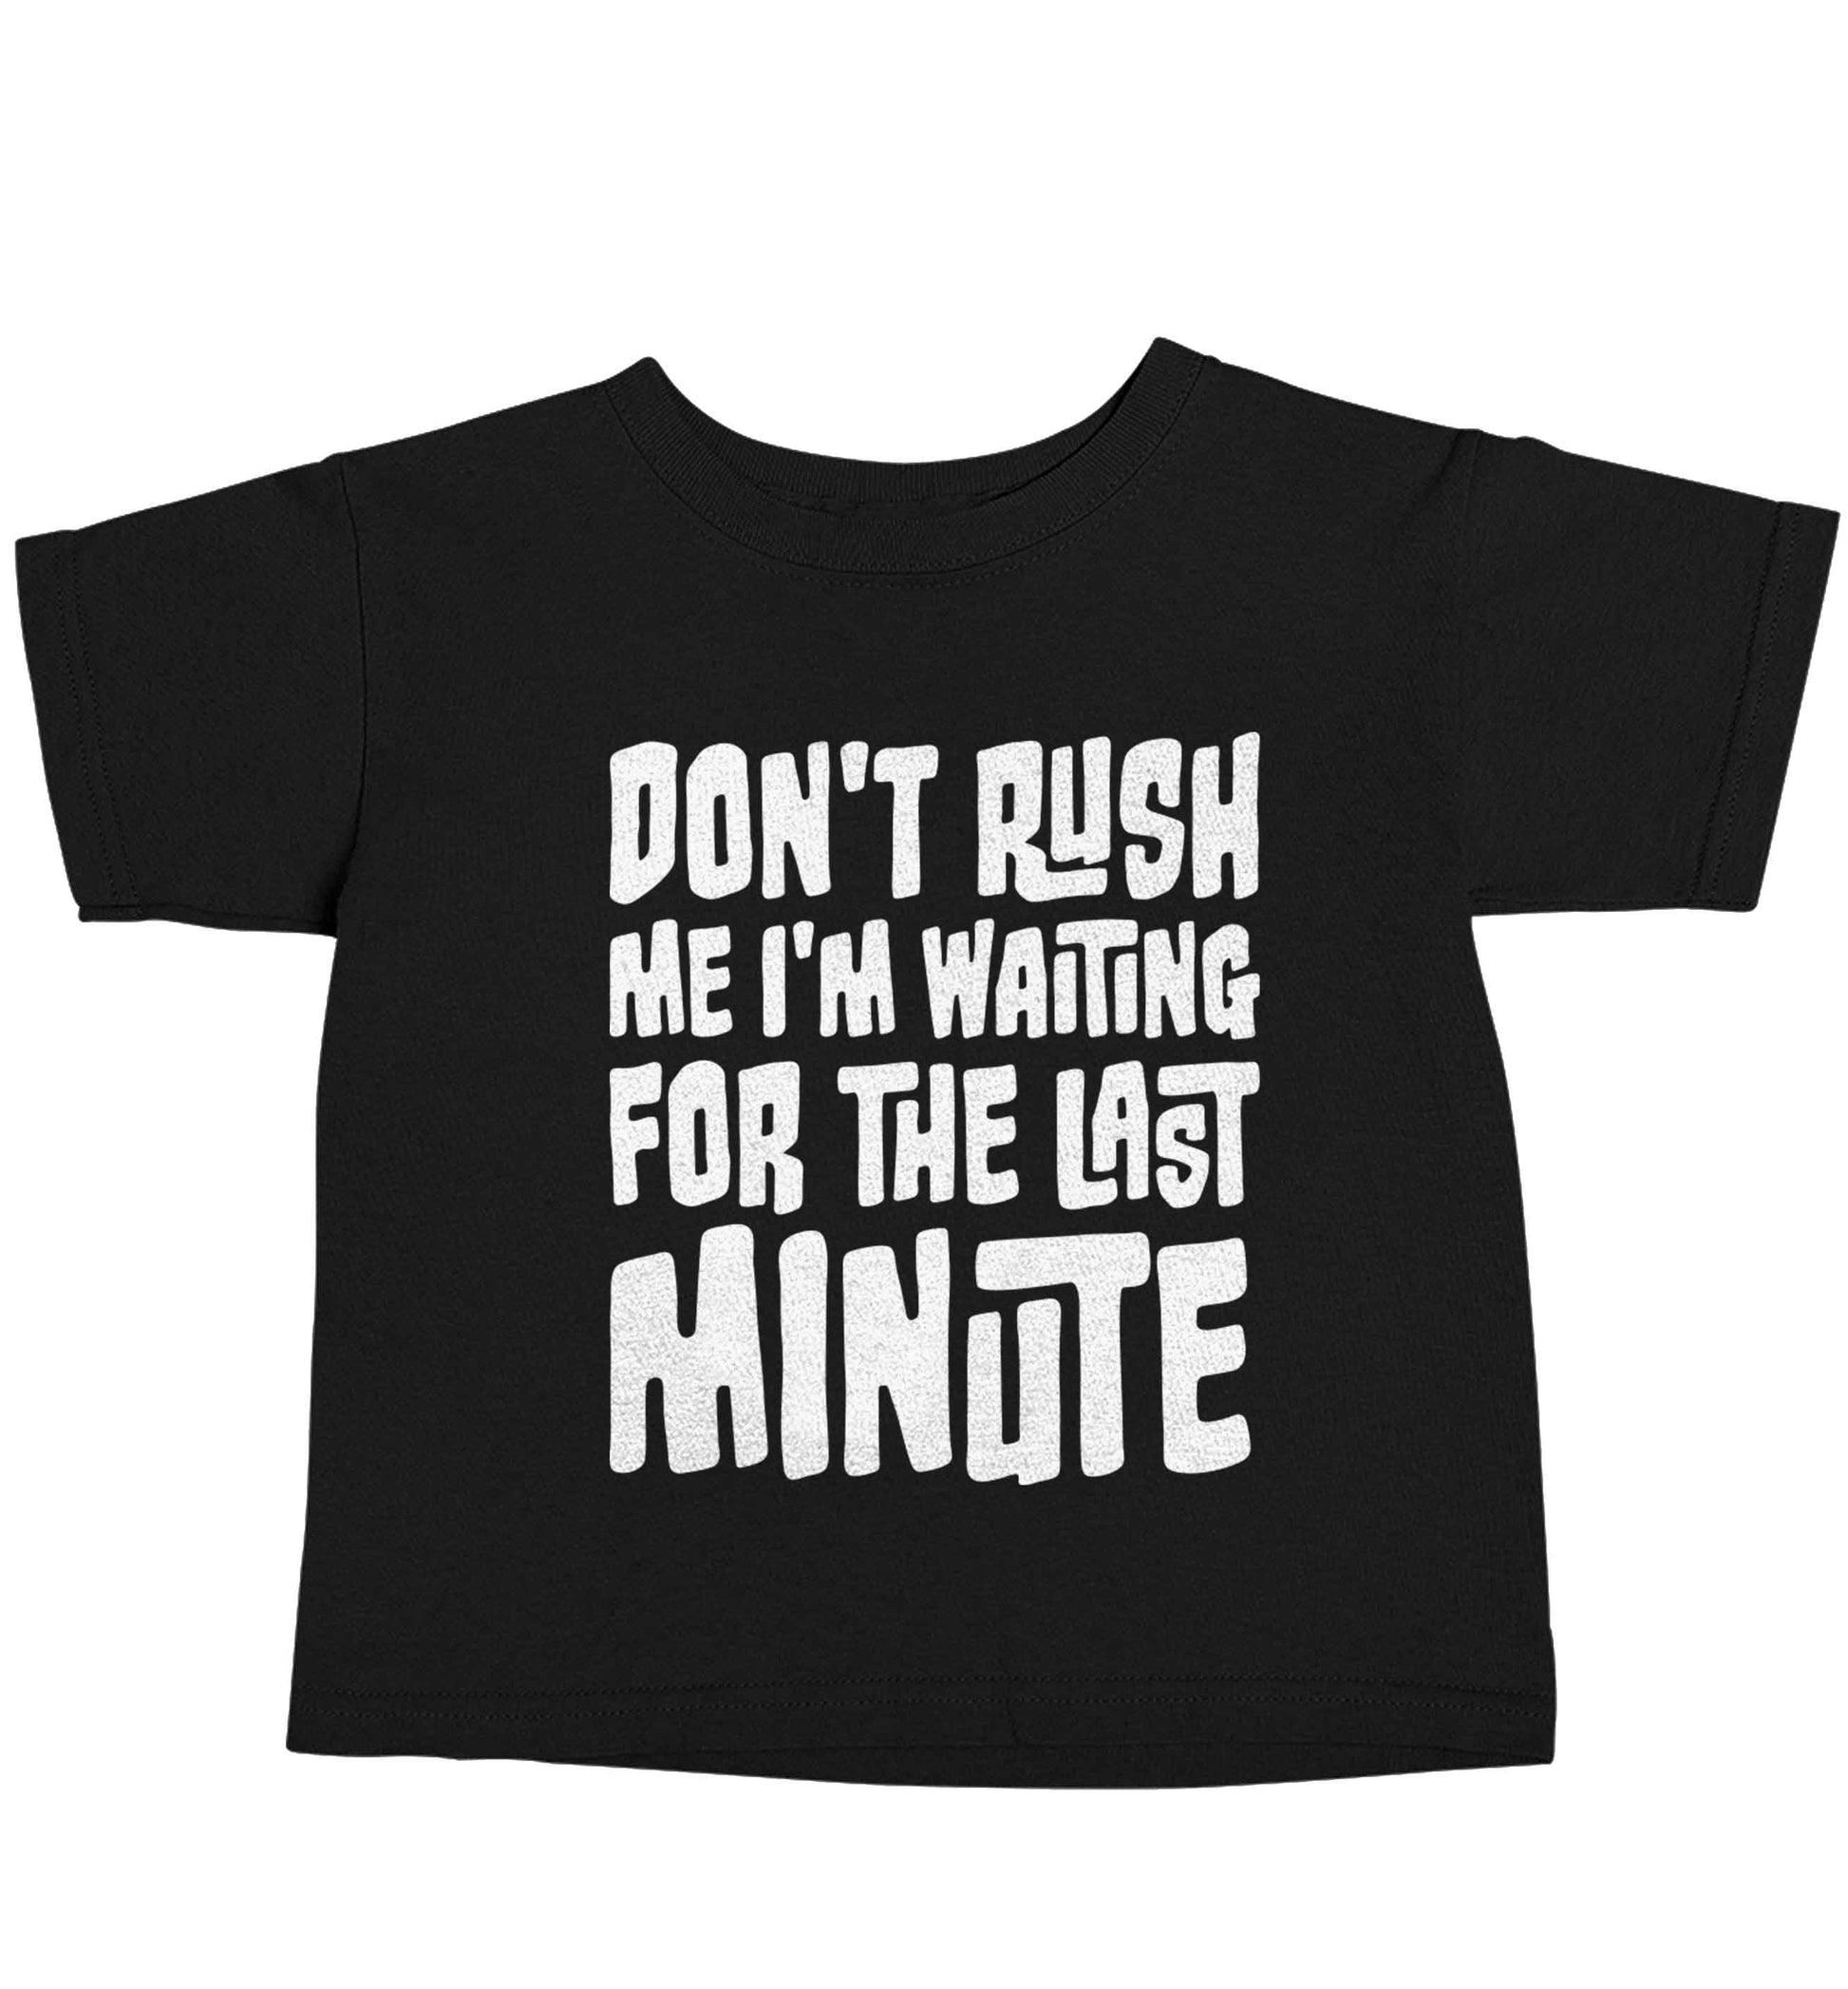 Don't rush me I'm waiting for the last minute Black baby toddler Tshirt 2 years